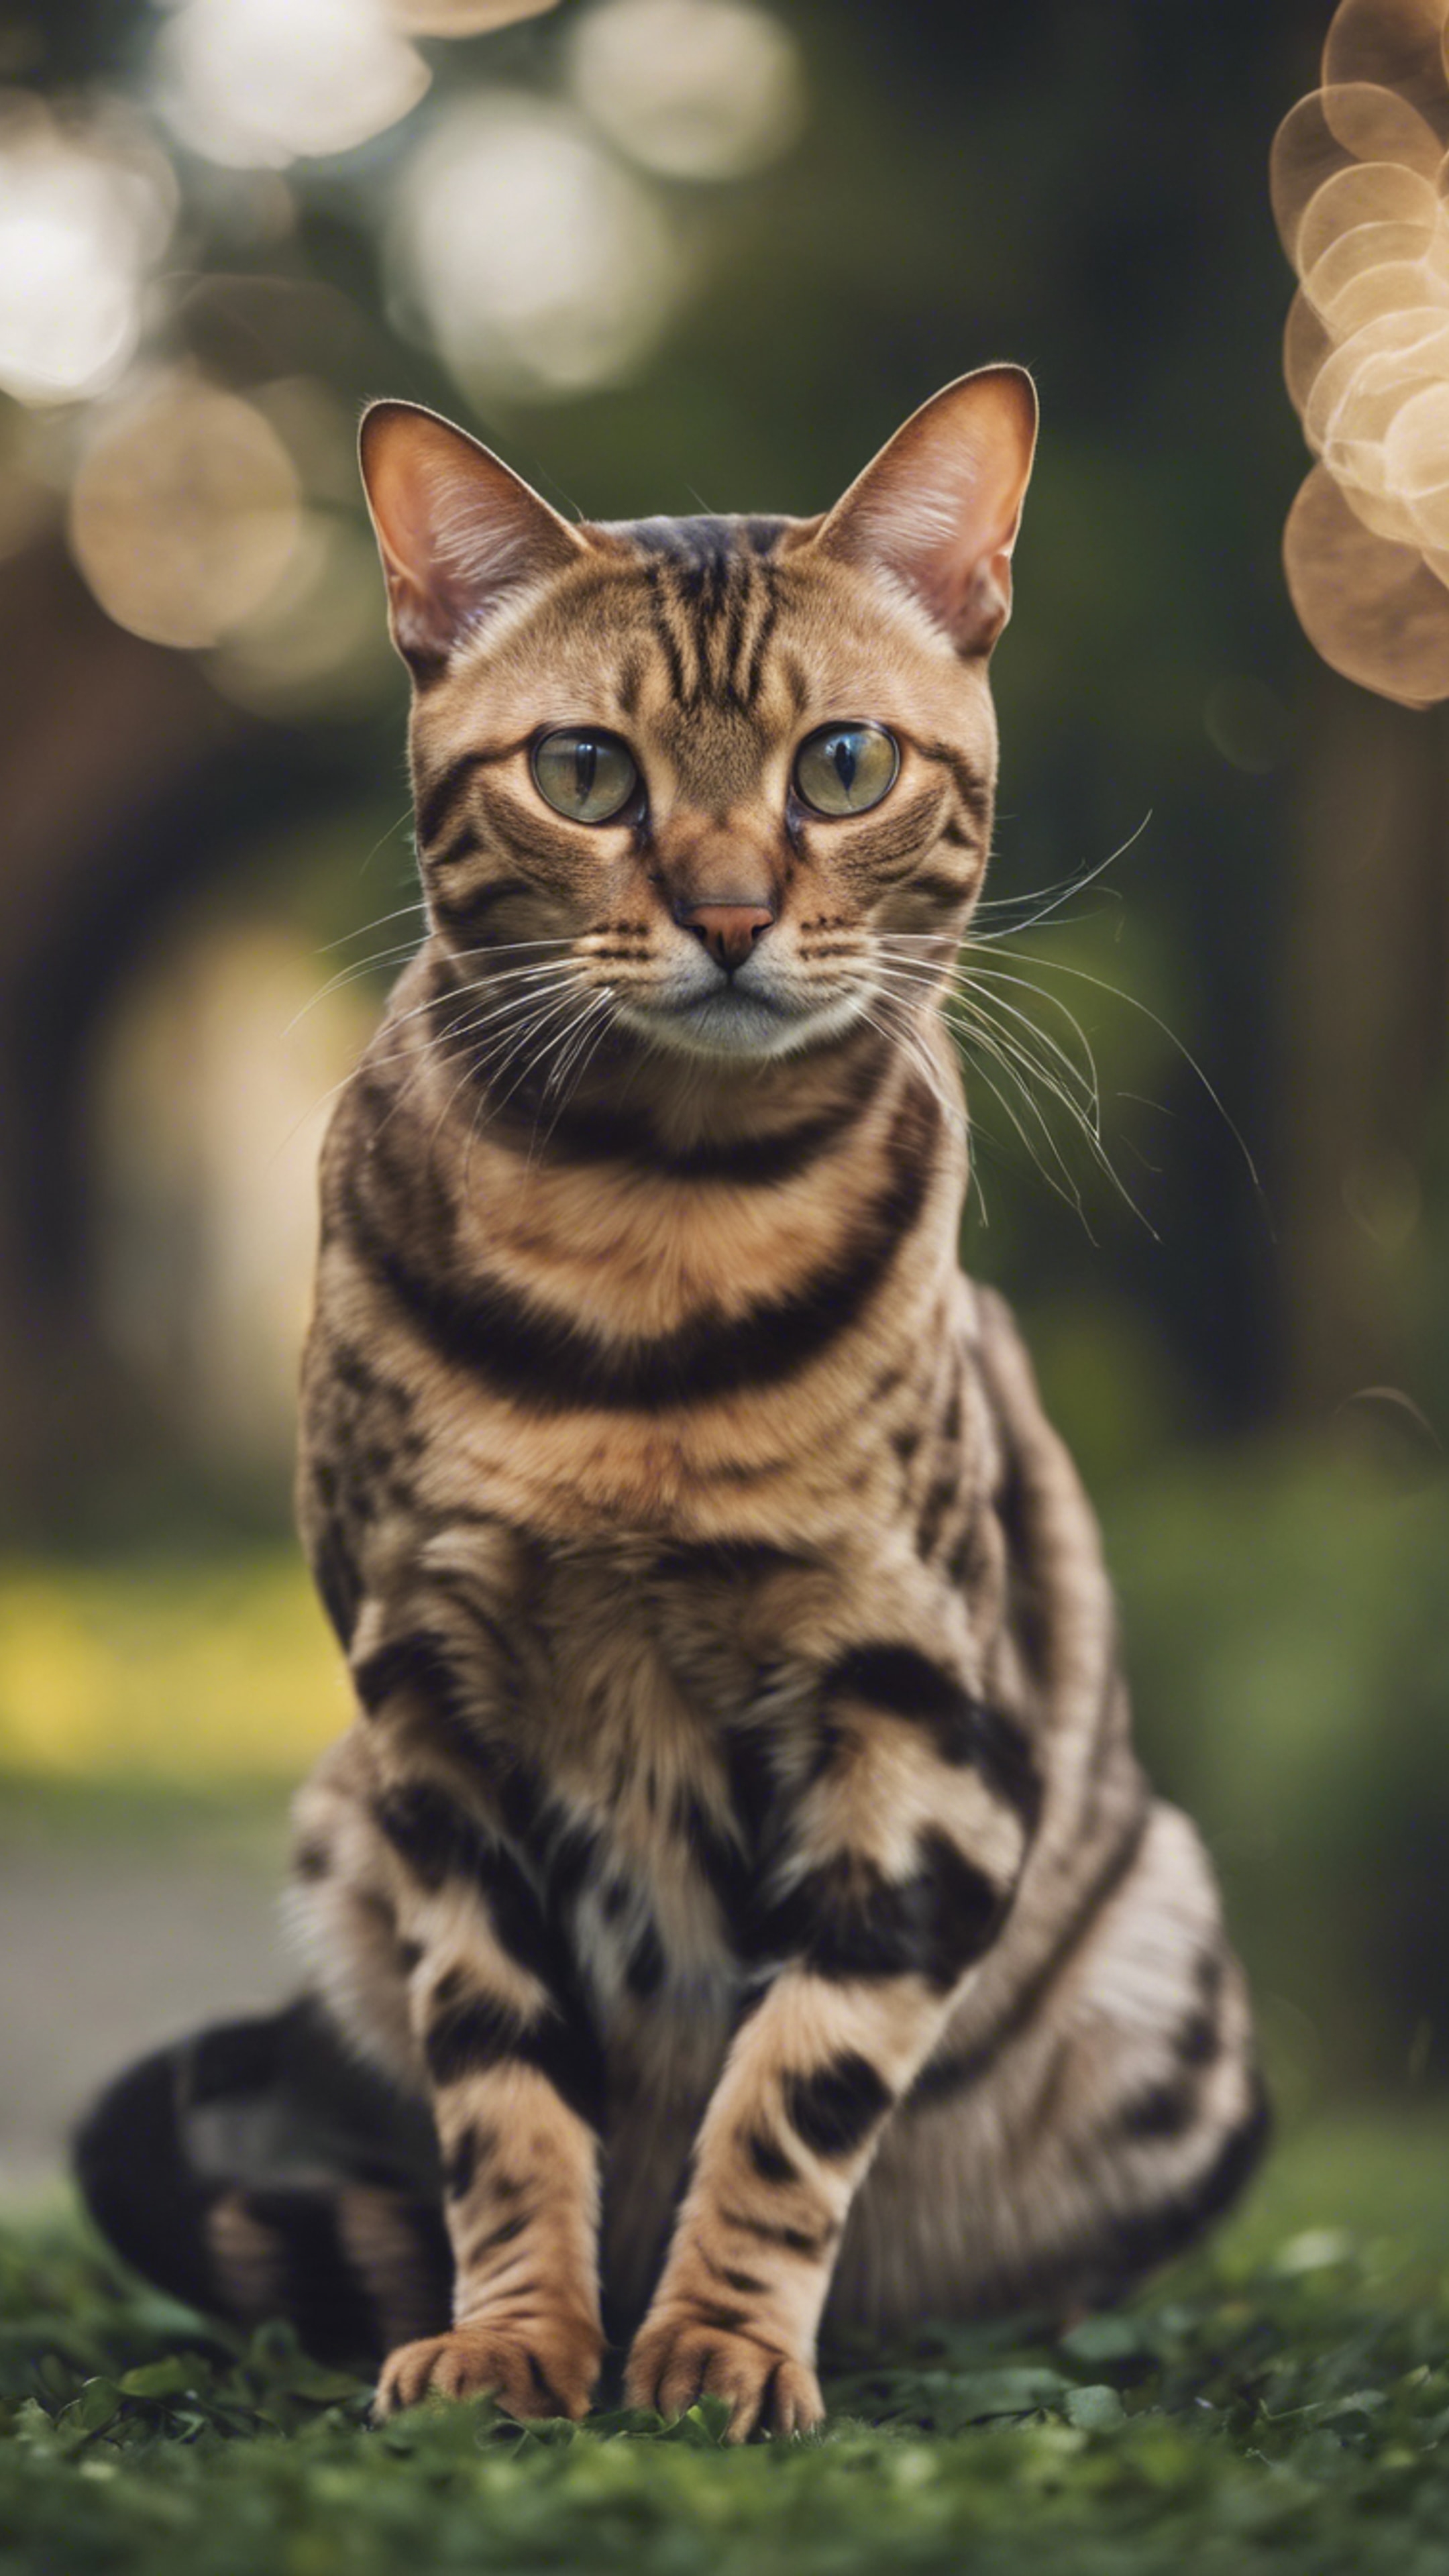 A sleek, aristocratic Bengal cat royally ignoring a mouse scampering by. Tapeta na zeď[9f7ab84a7c6b485a8696]